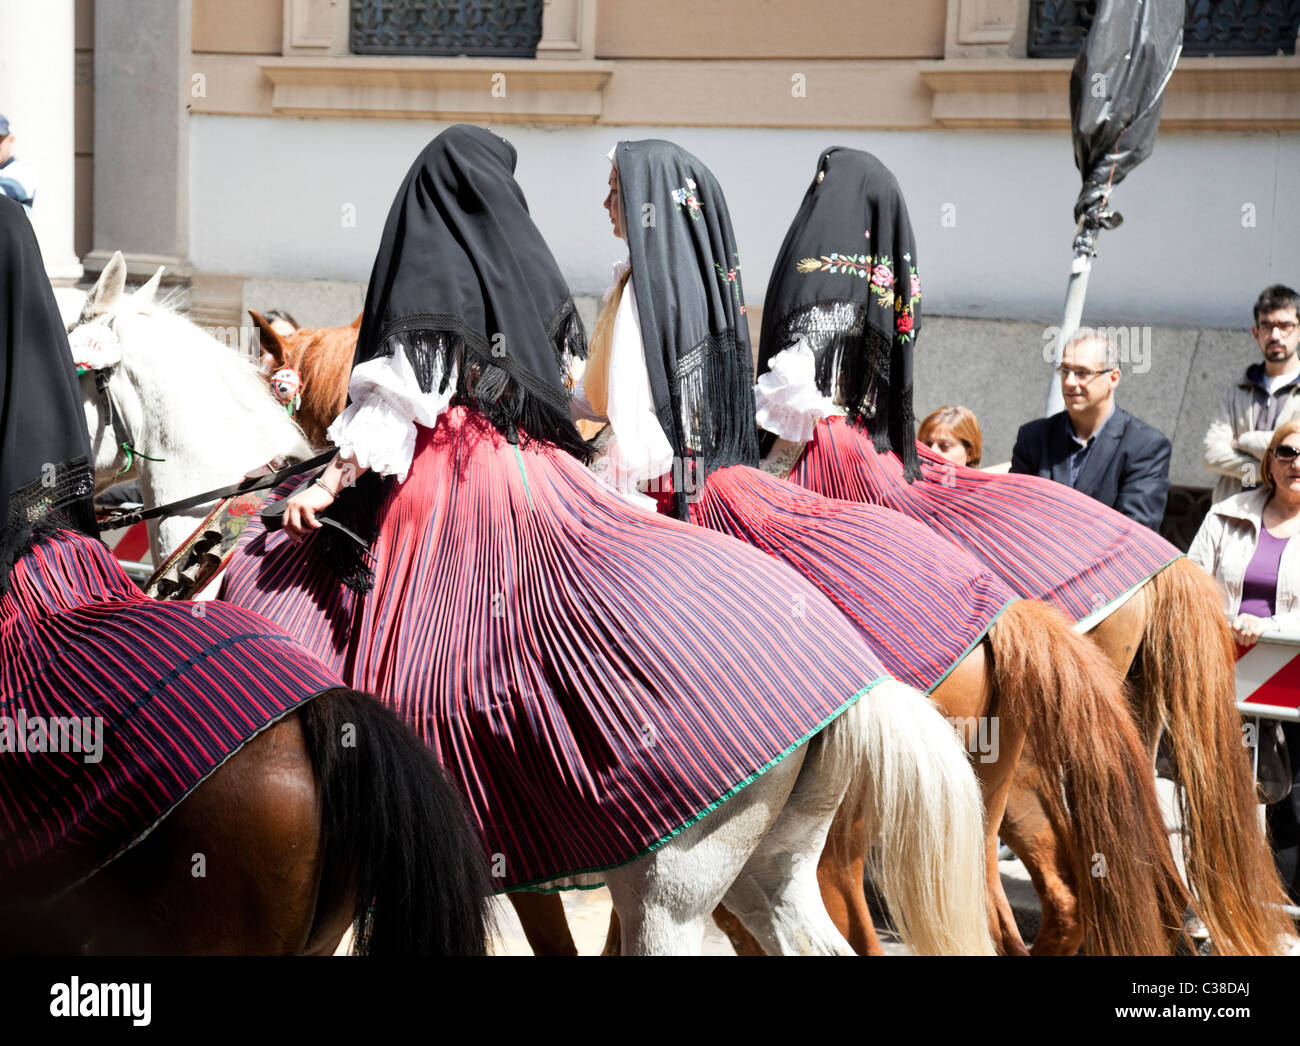 Sant'Efisio is one of the most important festival in Sardinia, take place in Cagliari, the capital of Sardinia. Stock Photo